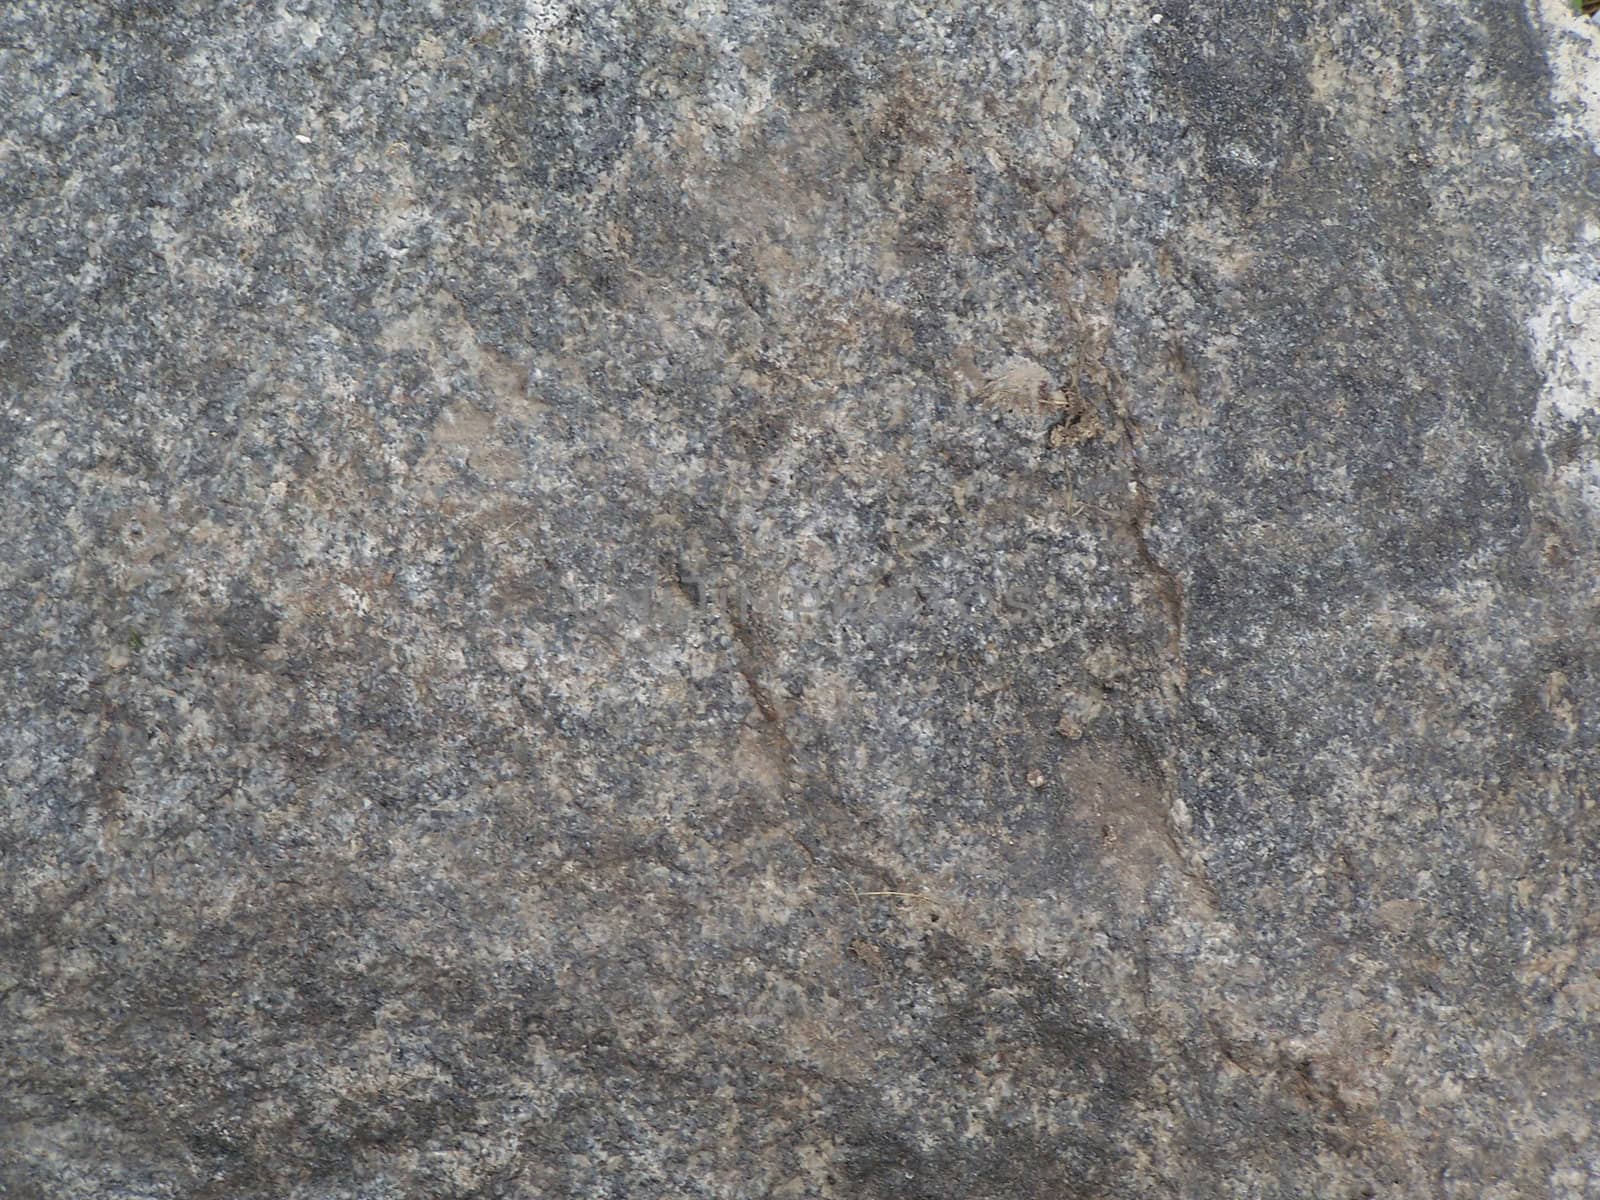 Close up of the grey granite texture.